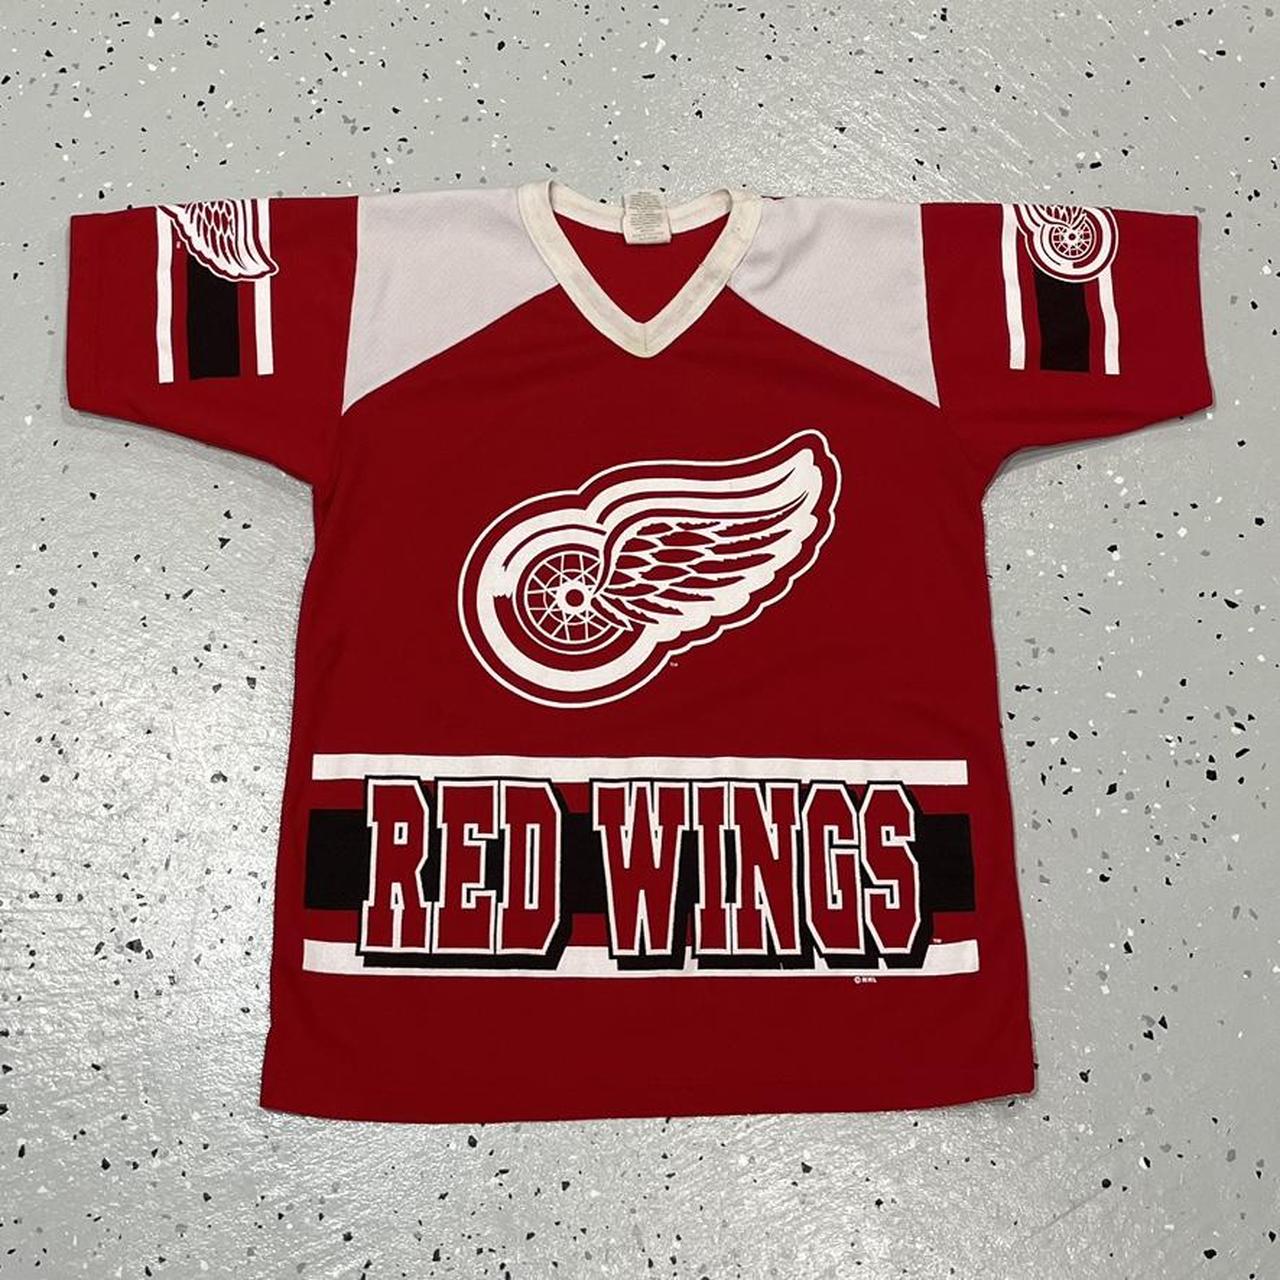 NHL Hockey Vintage 90s Detroit Red Wings Jersey Youth Small 